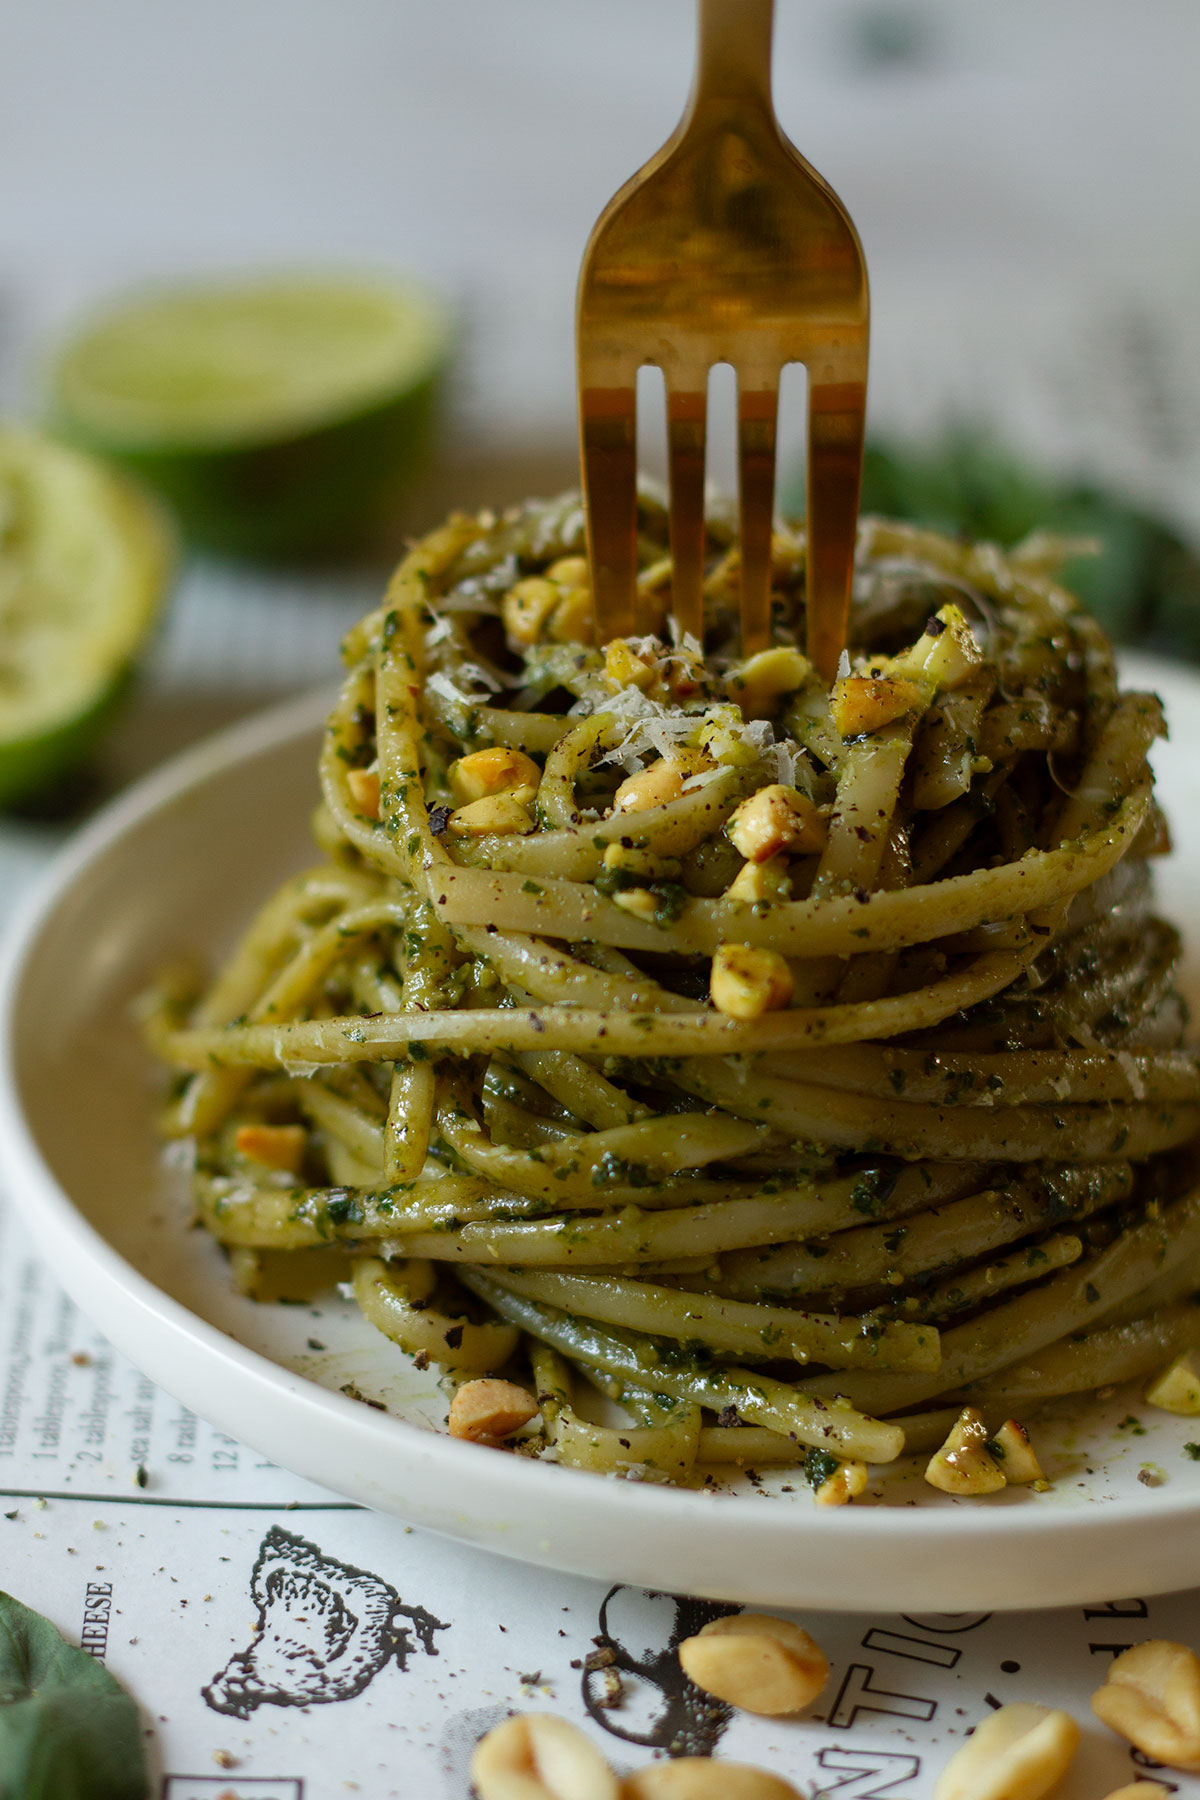 Thai Basil Pesto served with pasta on a white plate on a newspaper themed background with a scattering of peanuts and basil leaf in the foreground and a squeezed lime behind the plate.